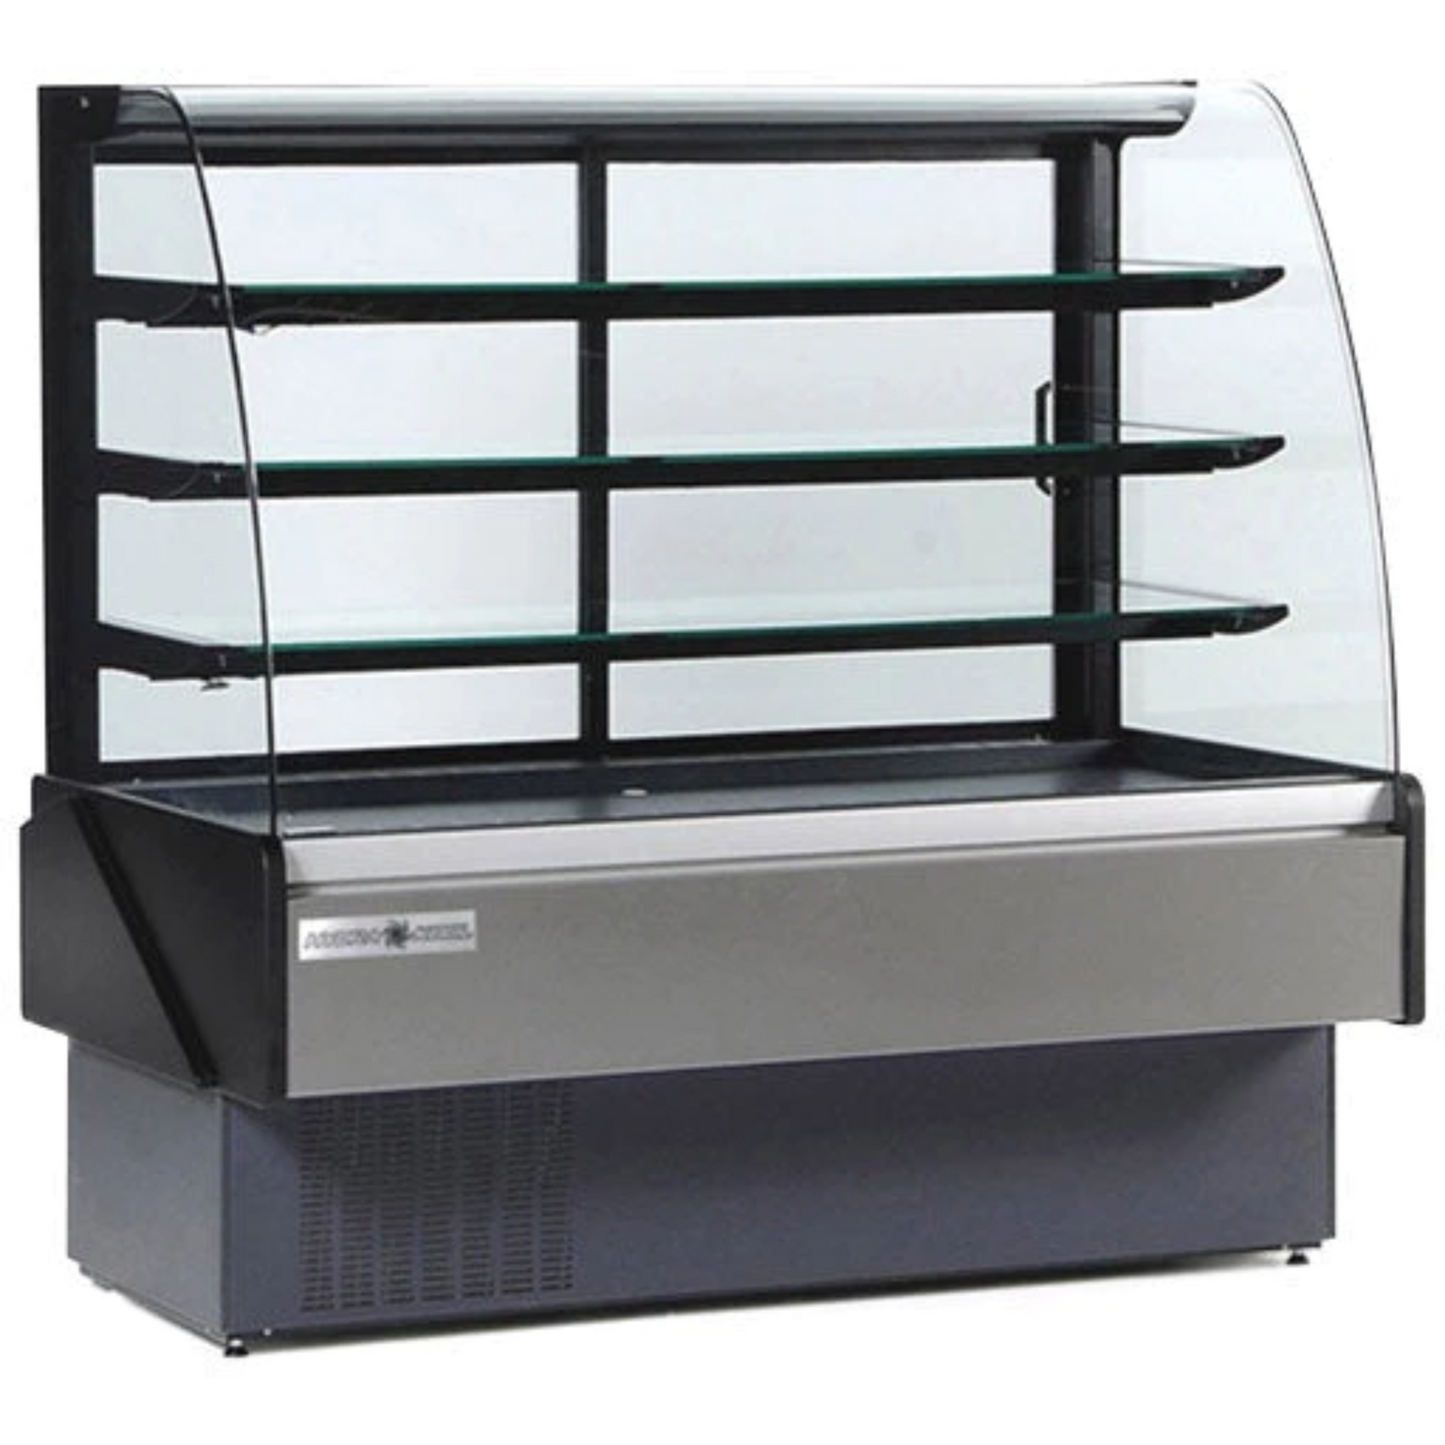 Hydra-Kool KBD-CG-40-D 40" Curved Glass Bakery Deli Case Non-Refrigerated